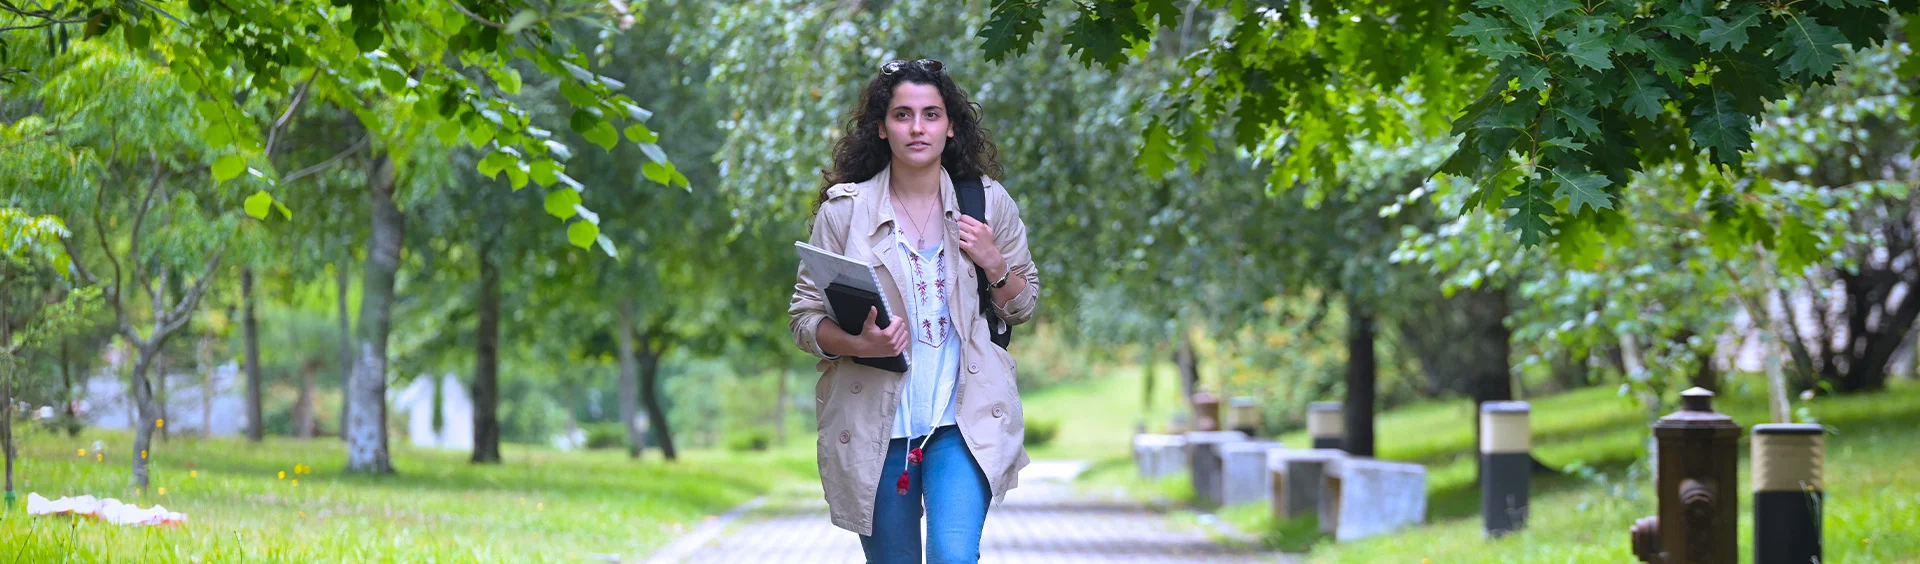 Student walking in the gardens of the Faculty of Sciences campus of the University of Porto with books in hand